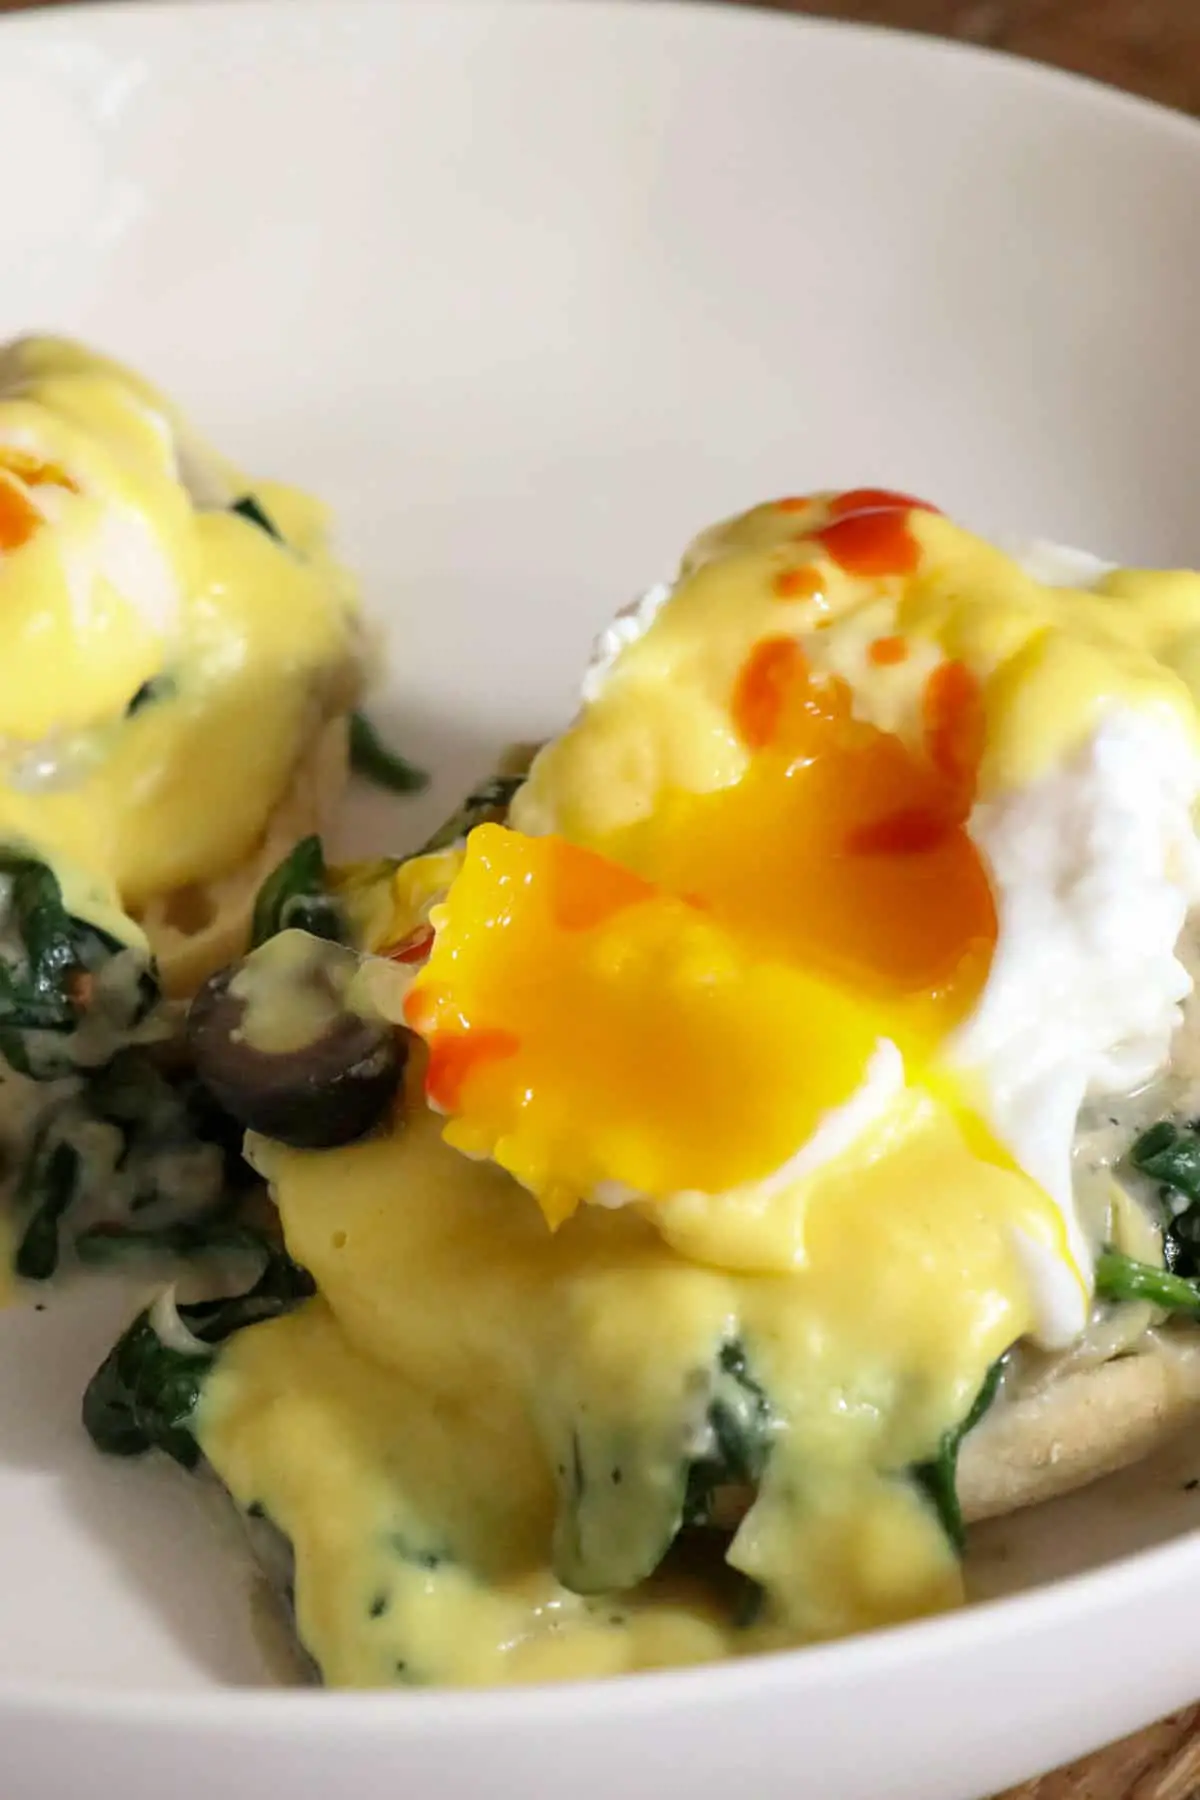 Poached eggs with hollandaise sauce and splashes of Tabasco and a black olive atop creamed spinach and artichokes and an English muffin on a white dish.